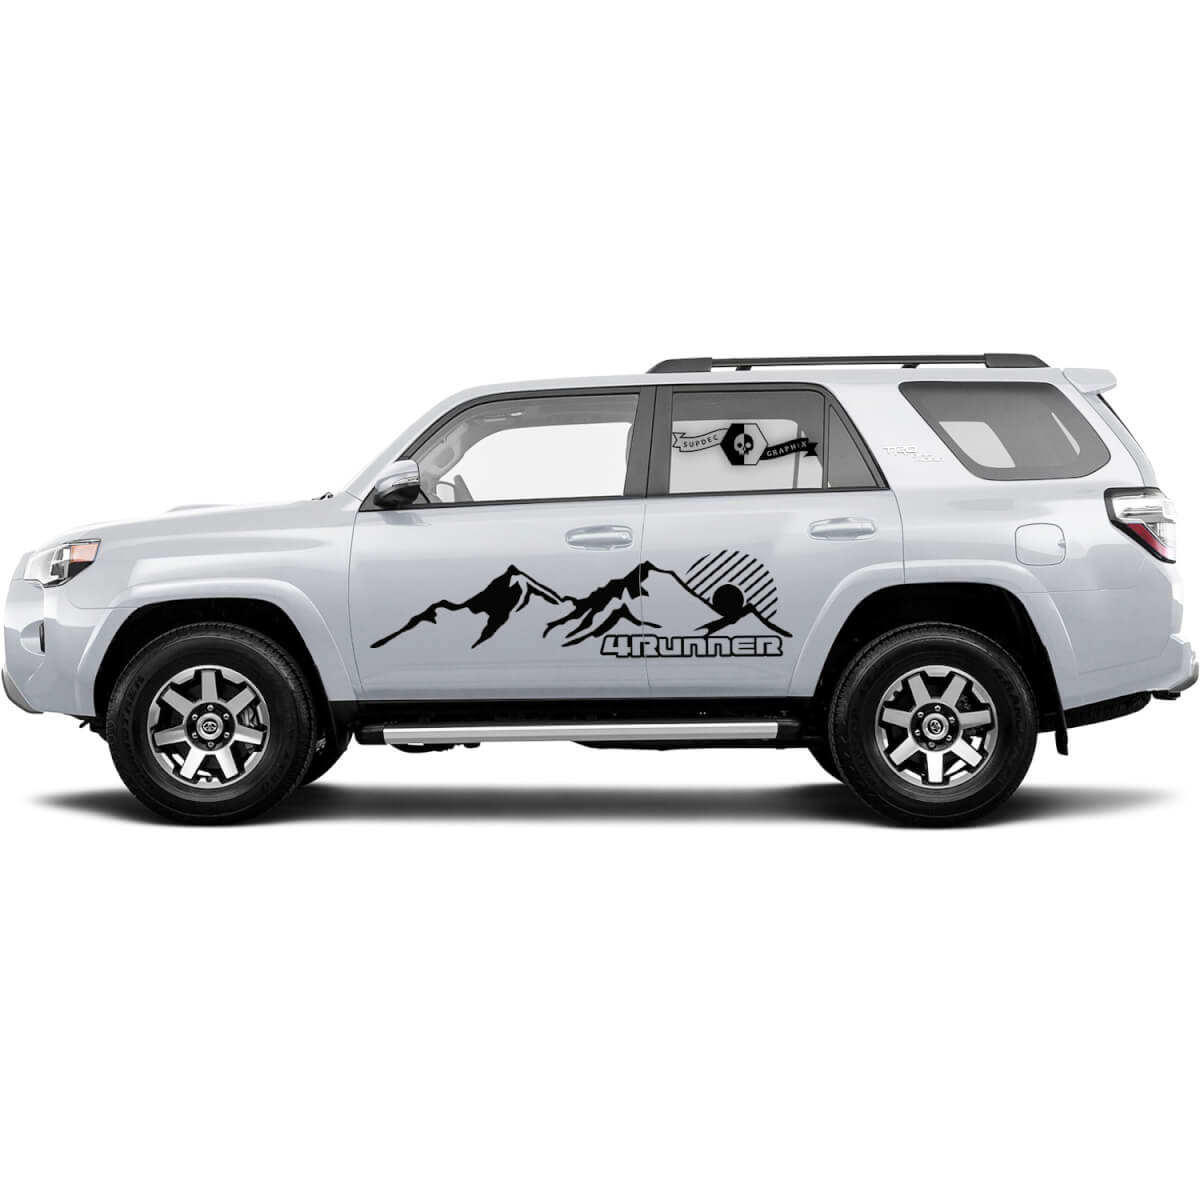 TRD Toyota Mountains Sunset for Side Doors Panel Decals Stickers for 4Runner